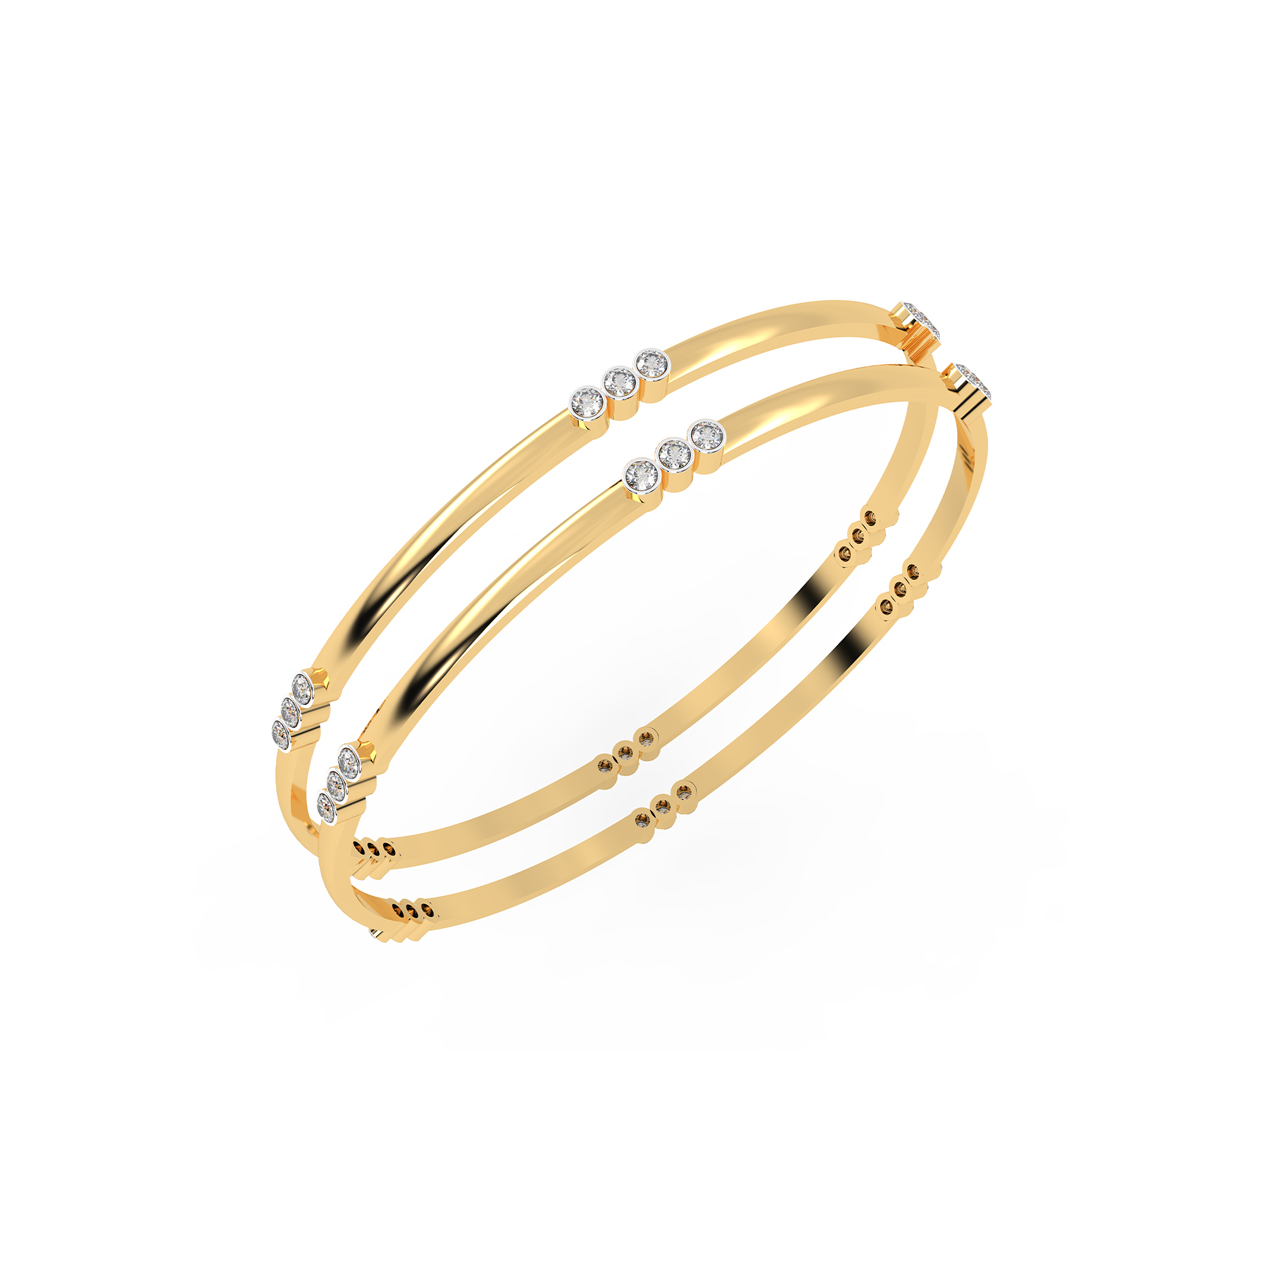 FLEXIBLE GOLD BRACELETS COLLECTION - WHP Jewellers